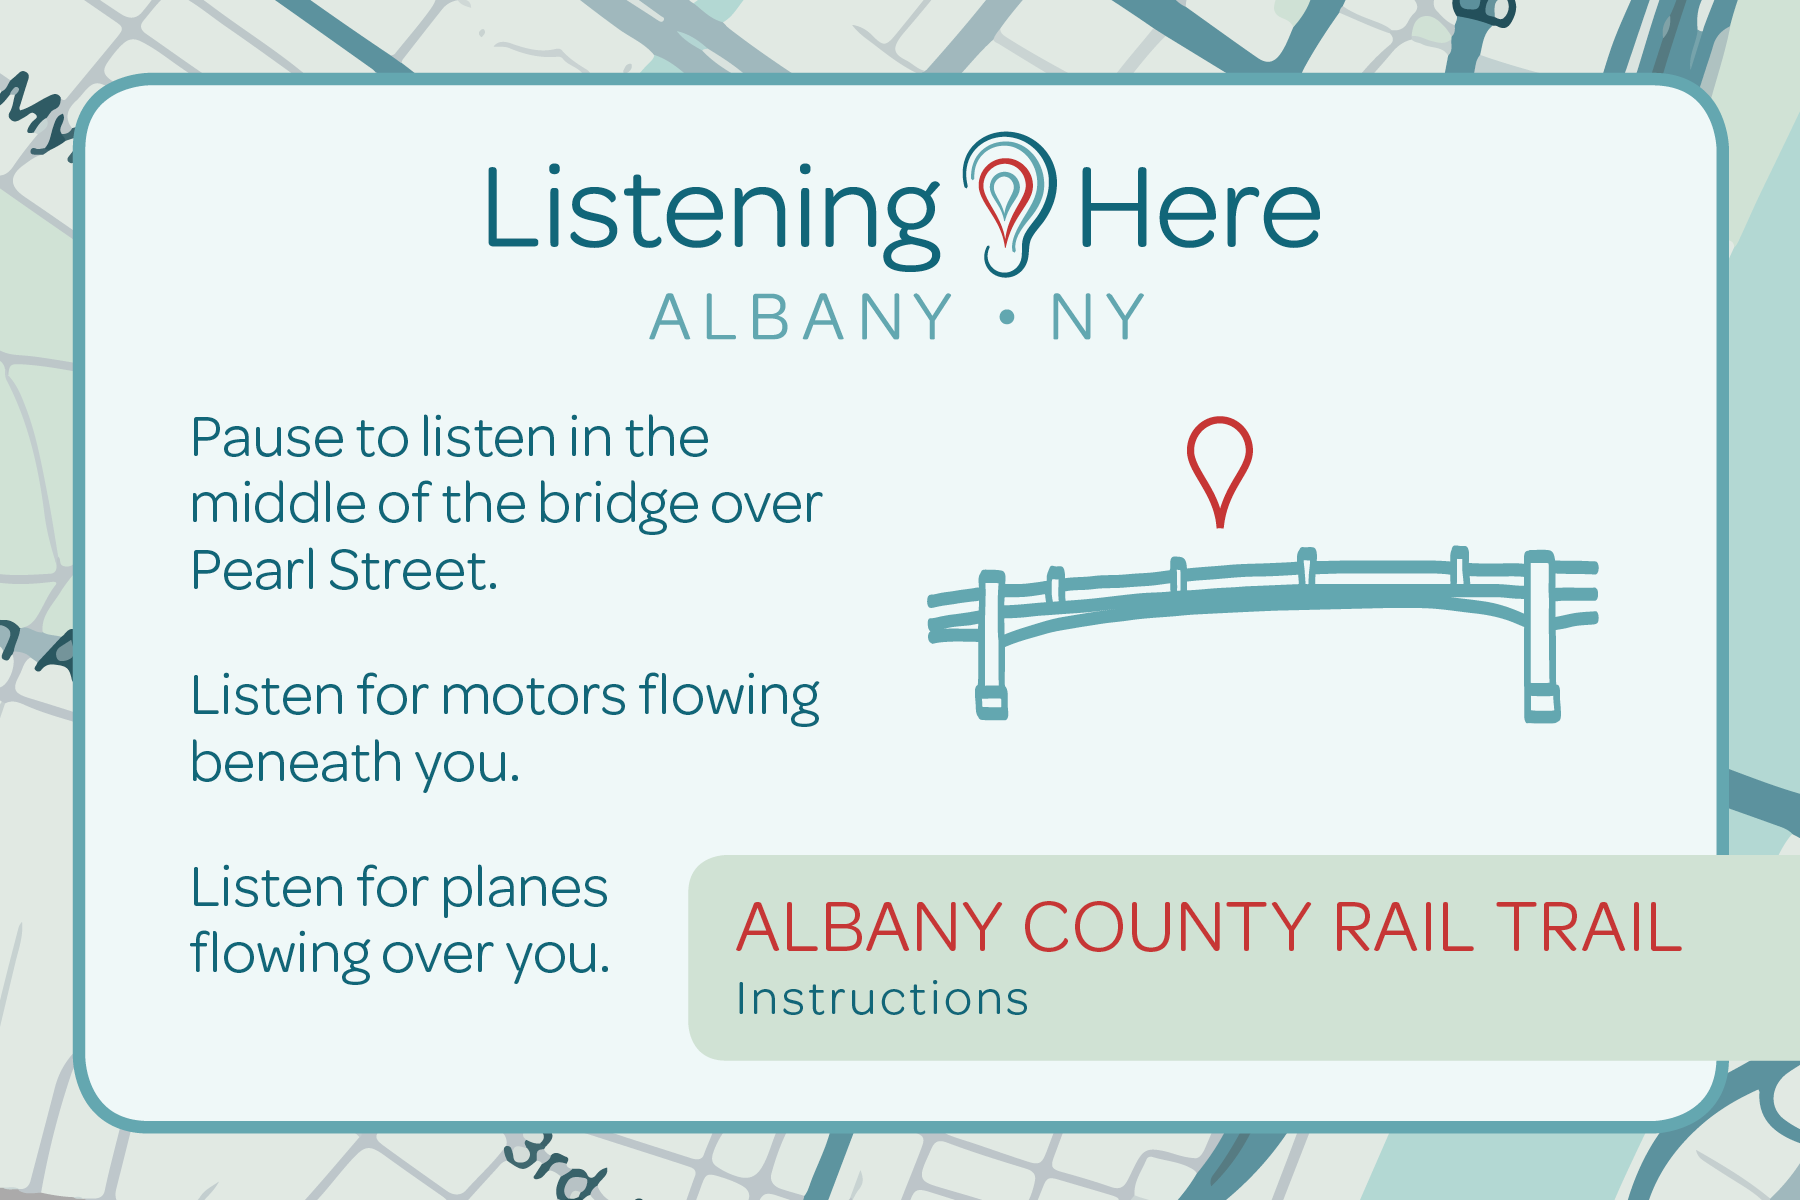 Listening HERE: Albany NY.    Albany County Rail Trail: Instructions.    Pause to listen in the middle of the bridge over Pearl Street.    Listen for motors flowing beneath you.    Listen for planes flowing over you.